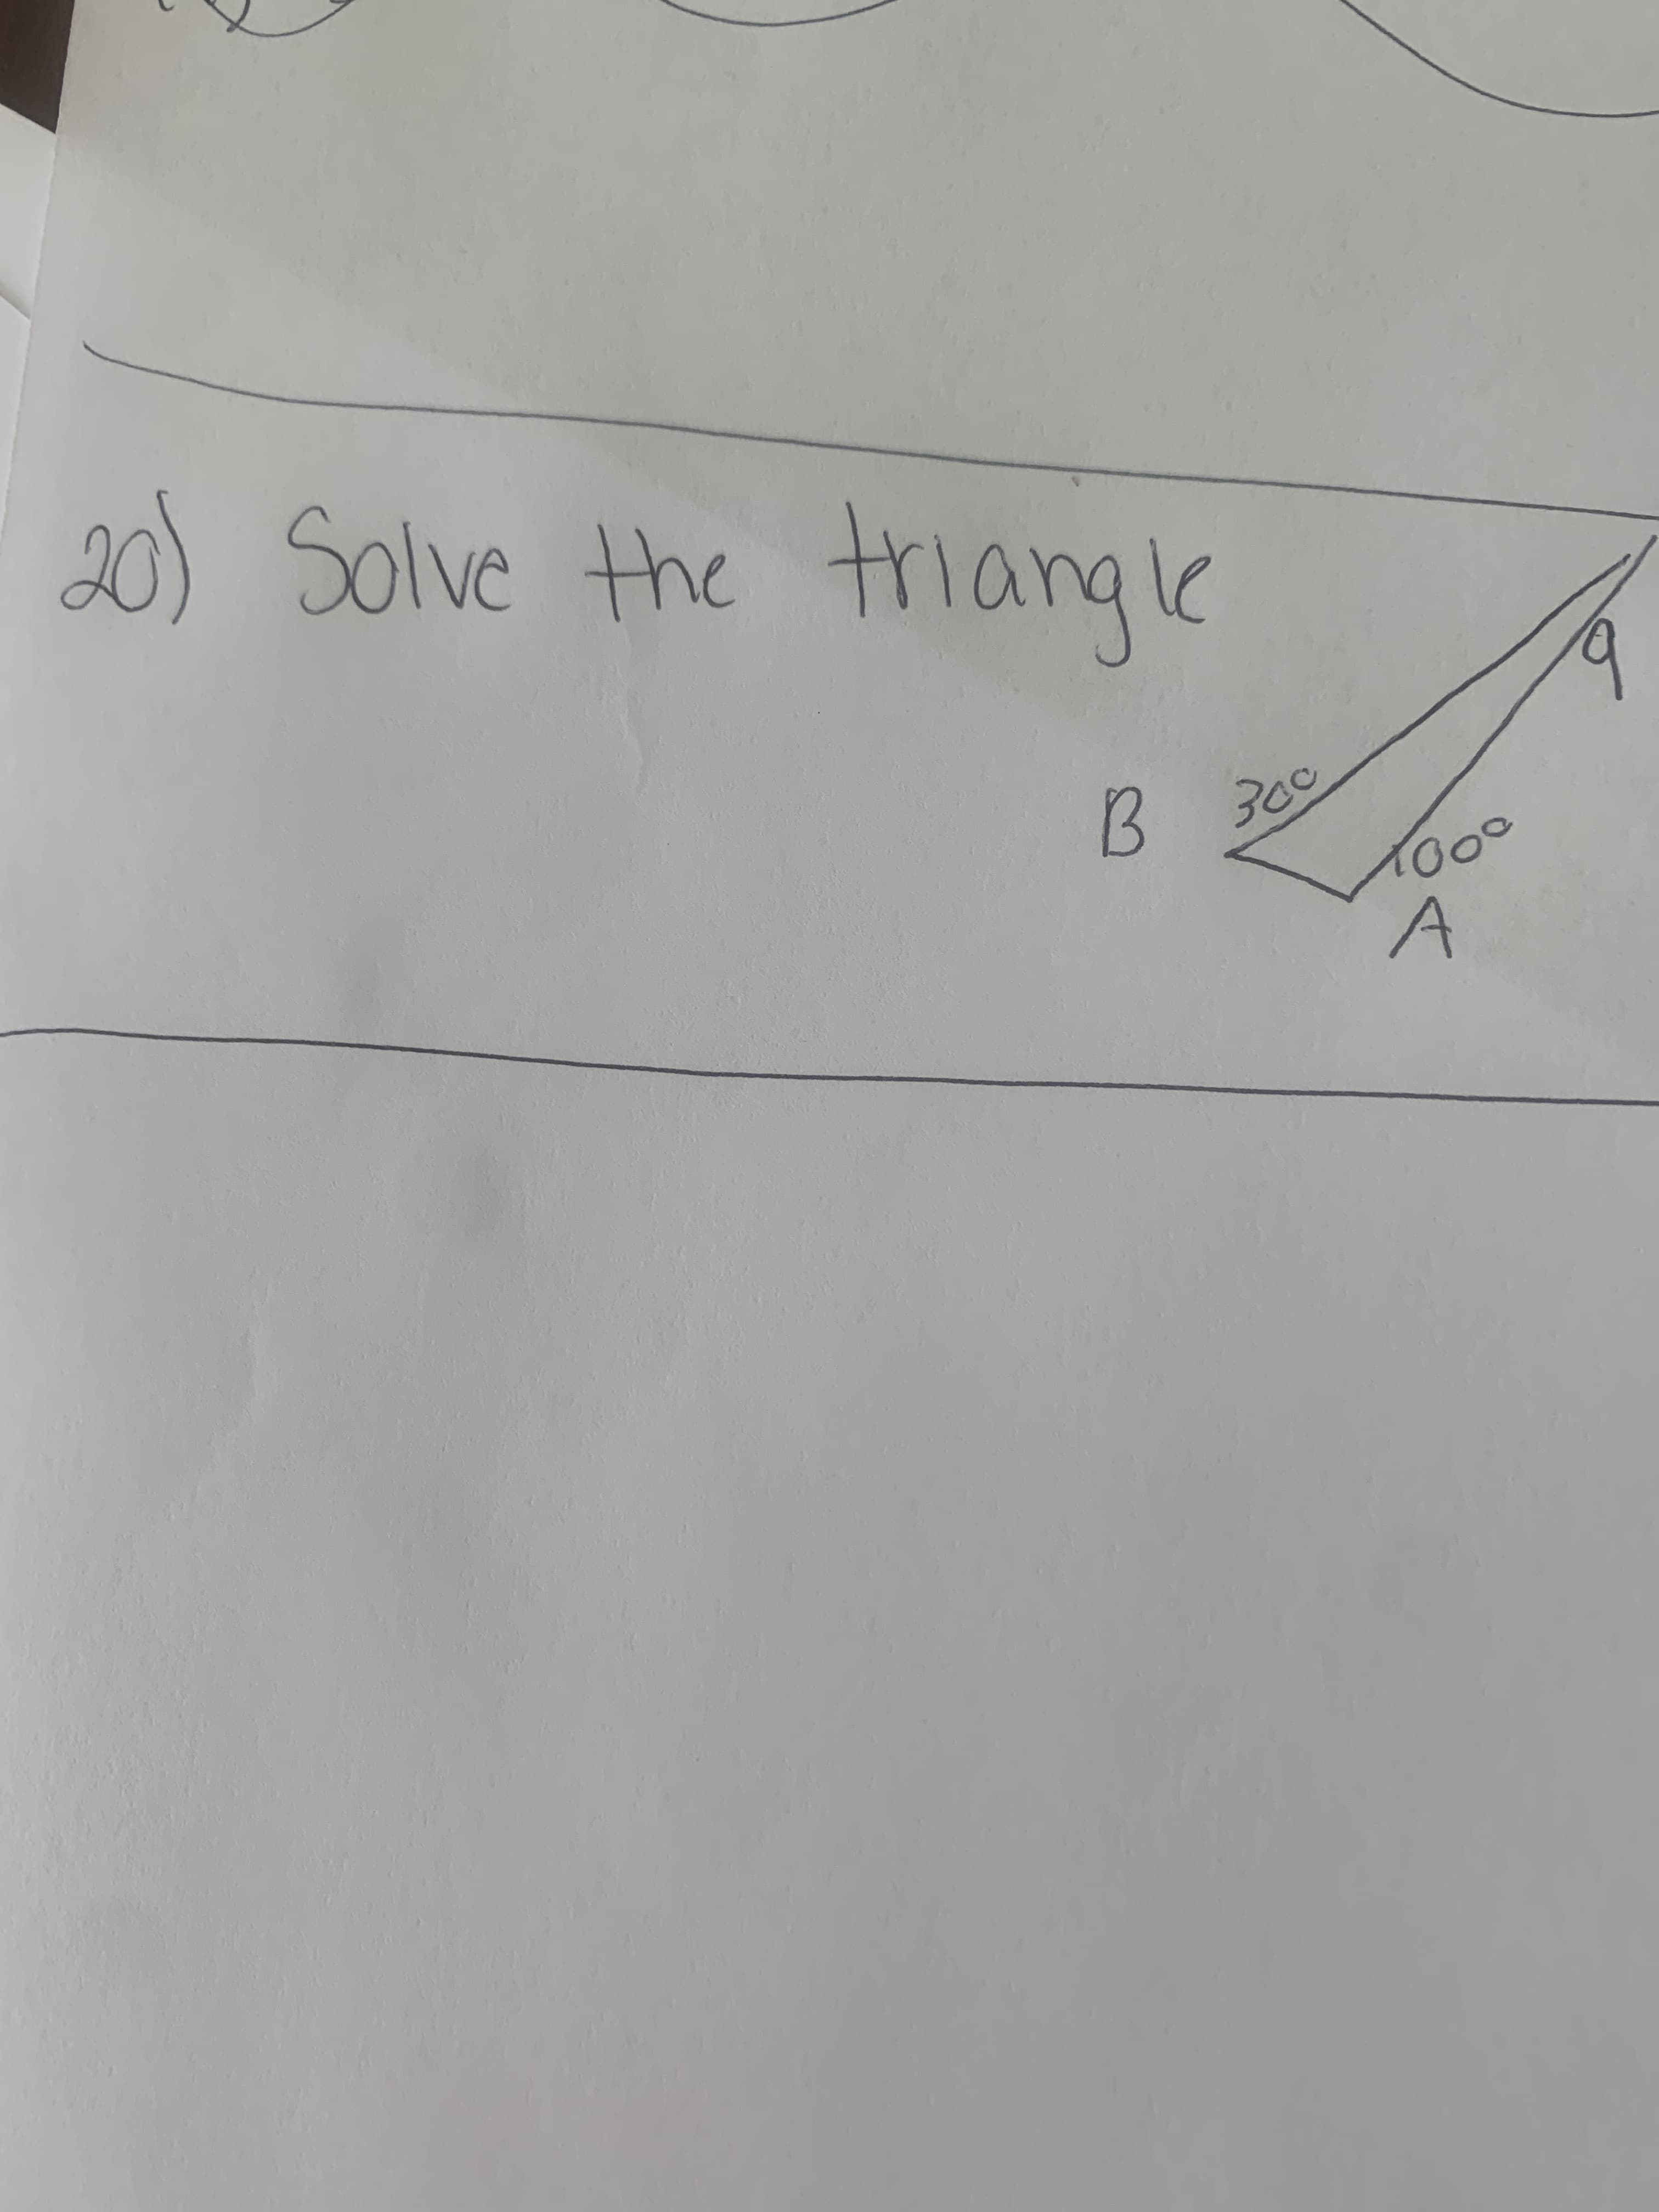 20) Solve the triangle
B 300
1000
A
